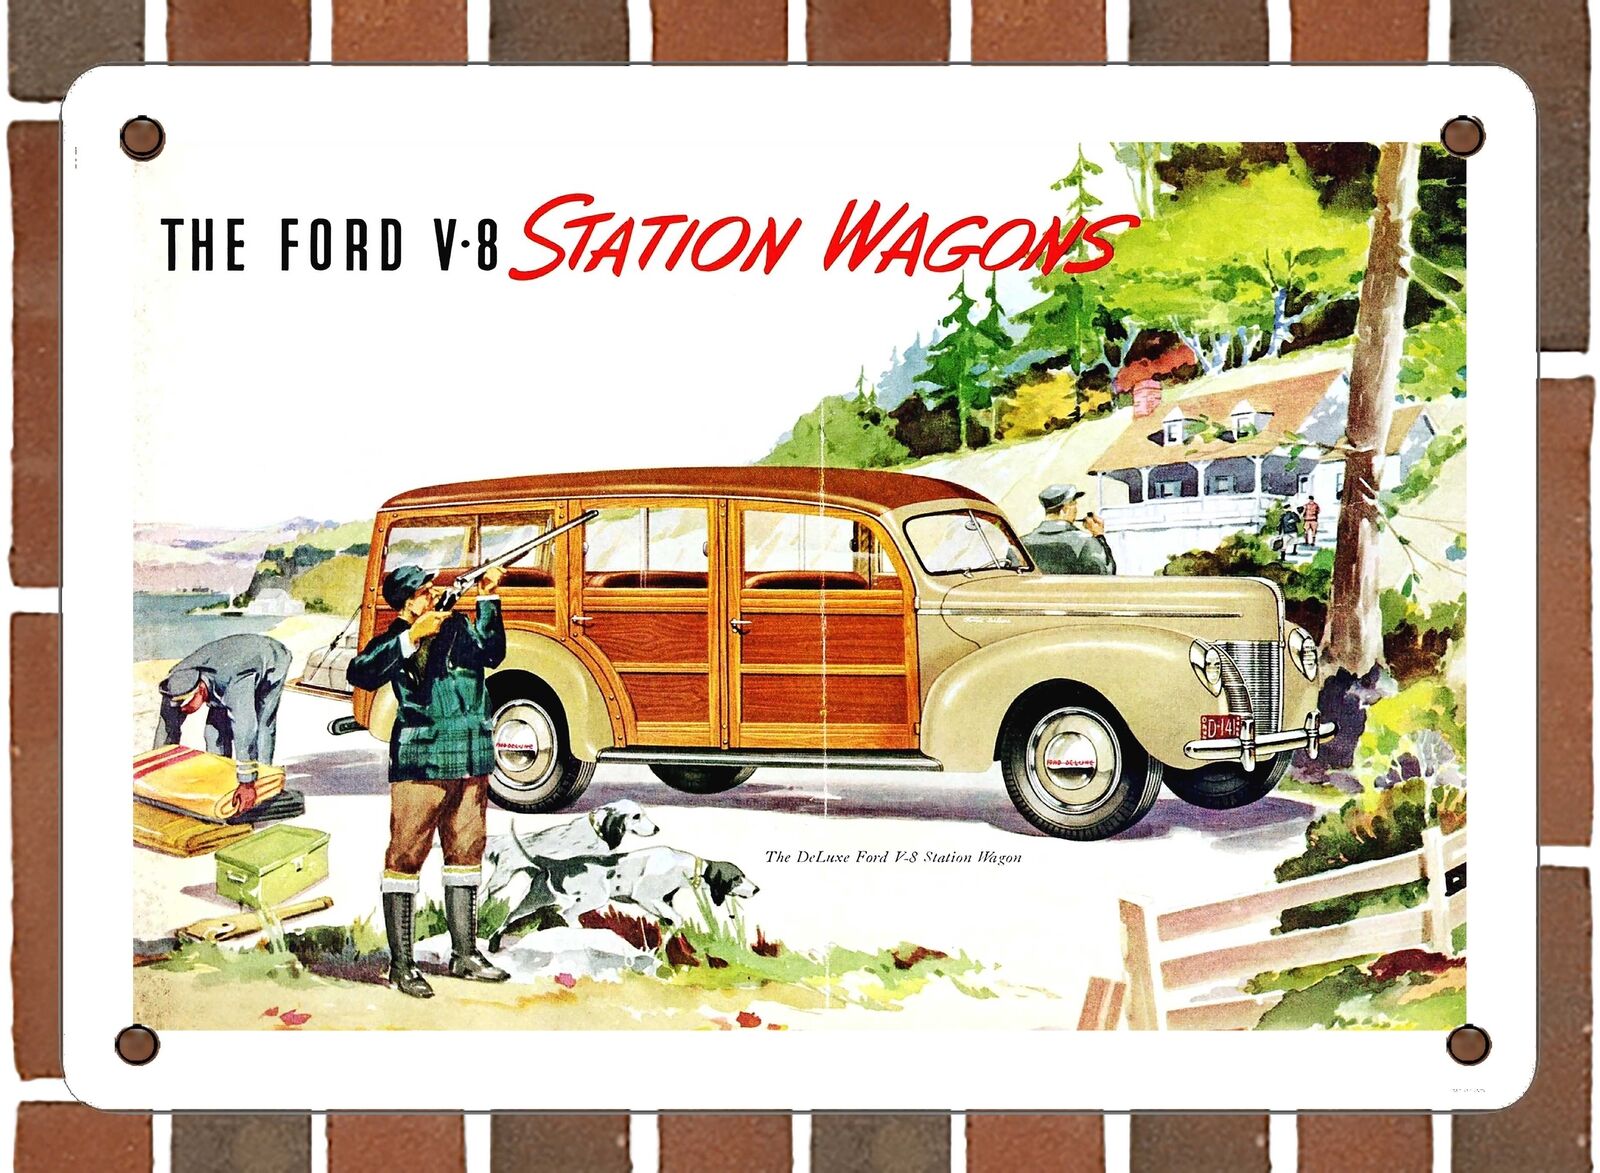 METAL SIGN - 1940 V8 Deluxe Station Wagon - 10x14 Inches